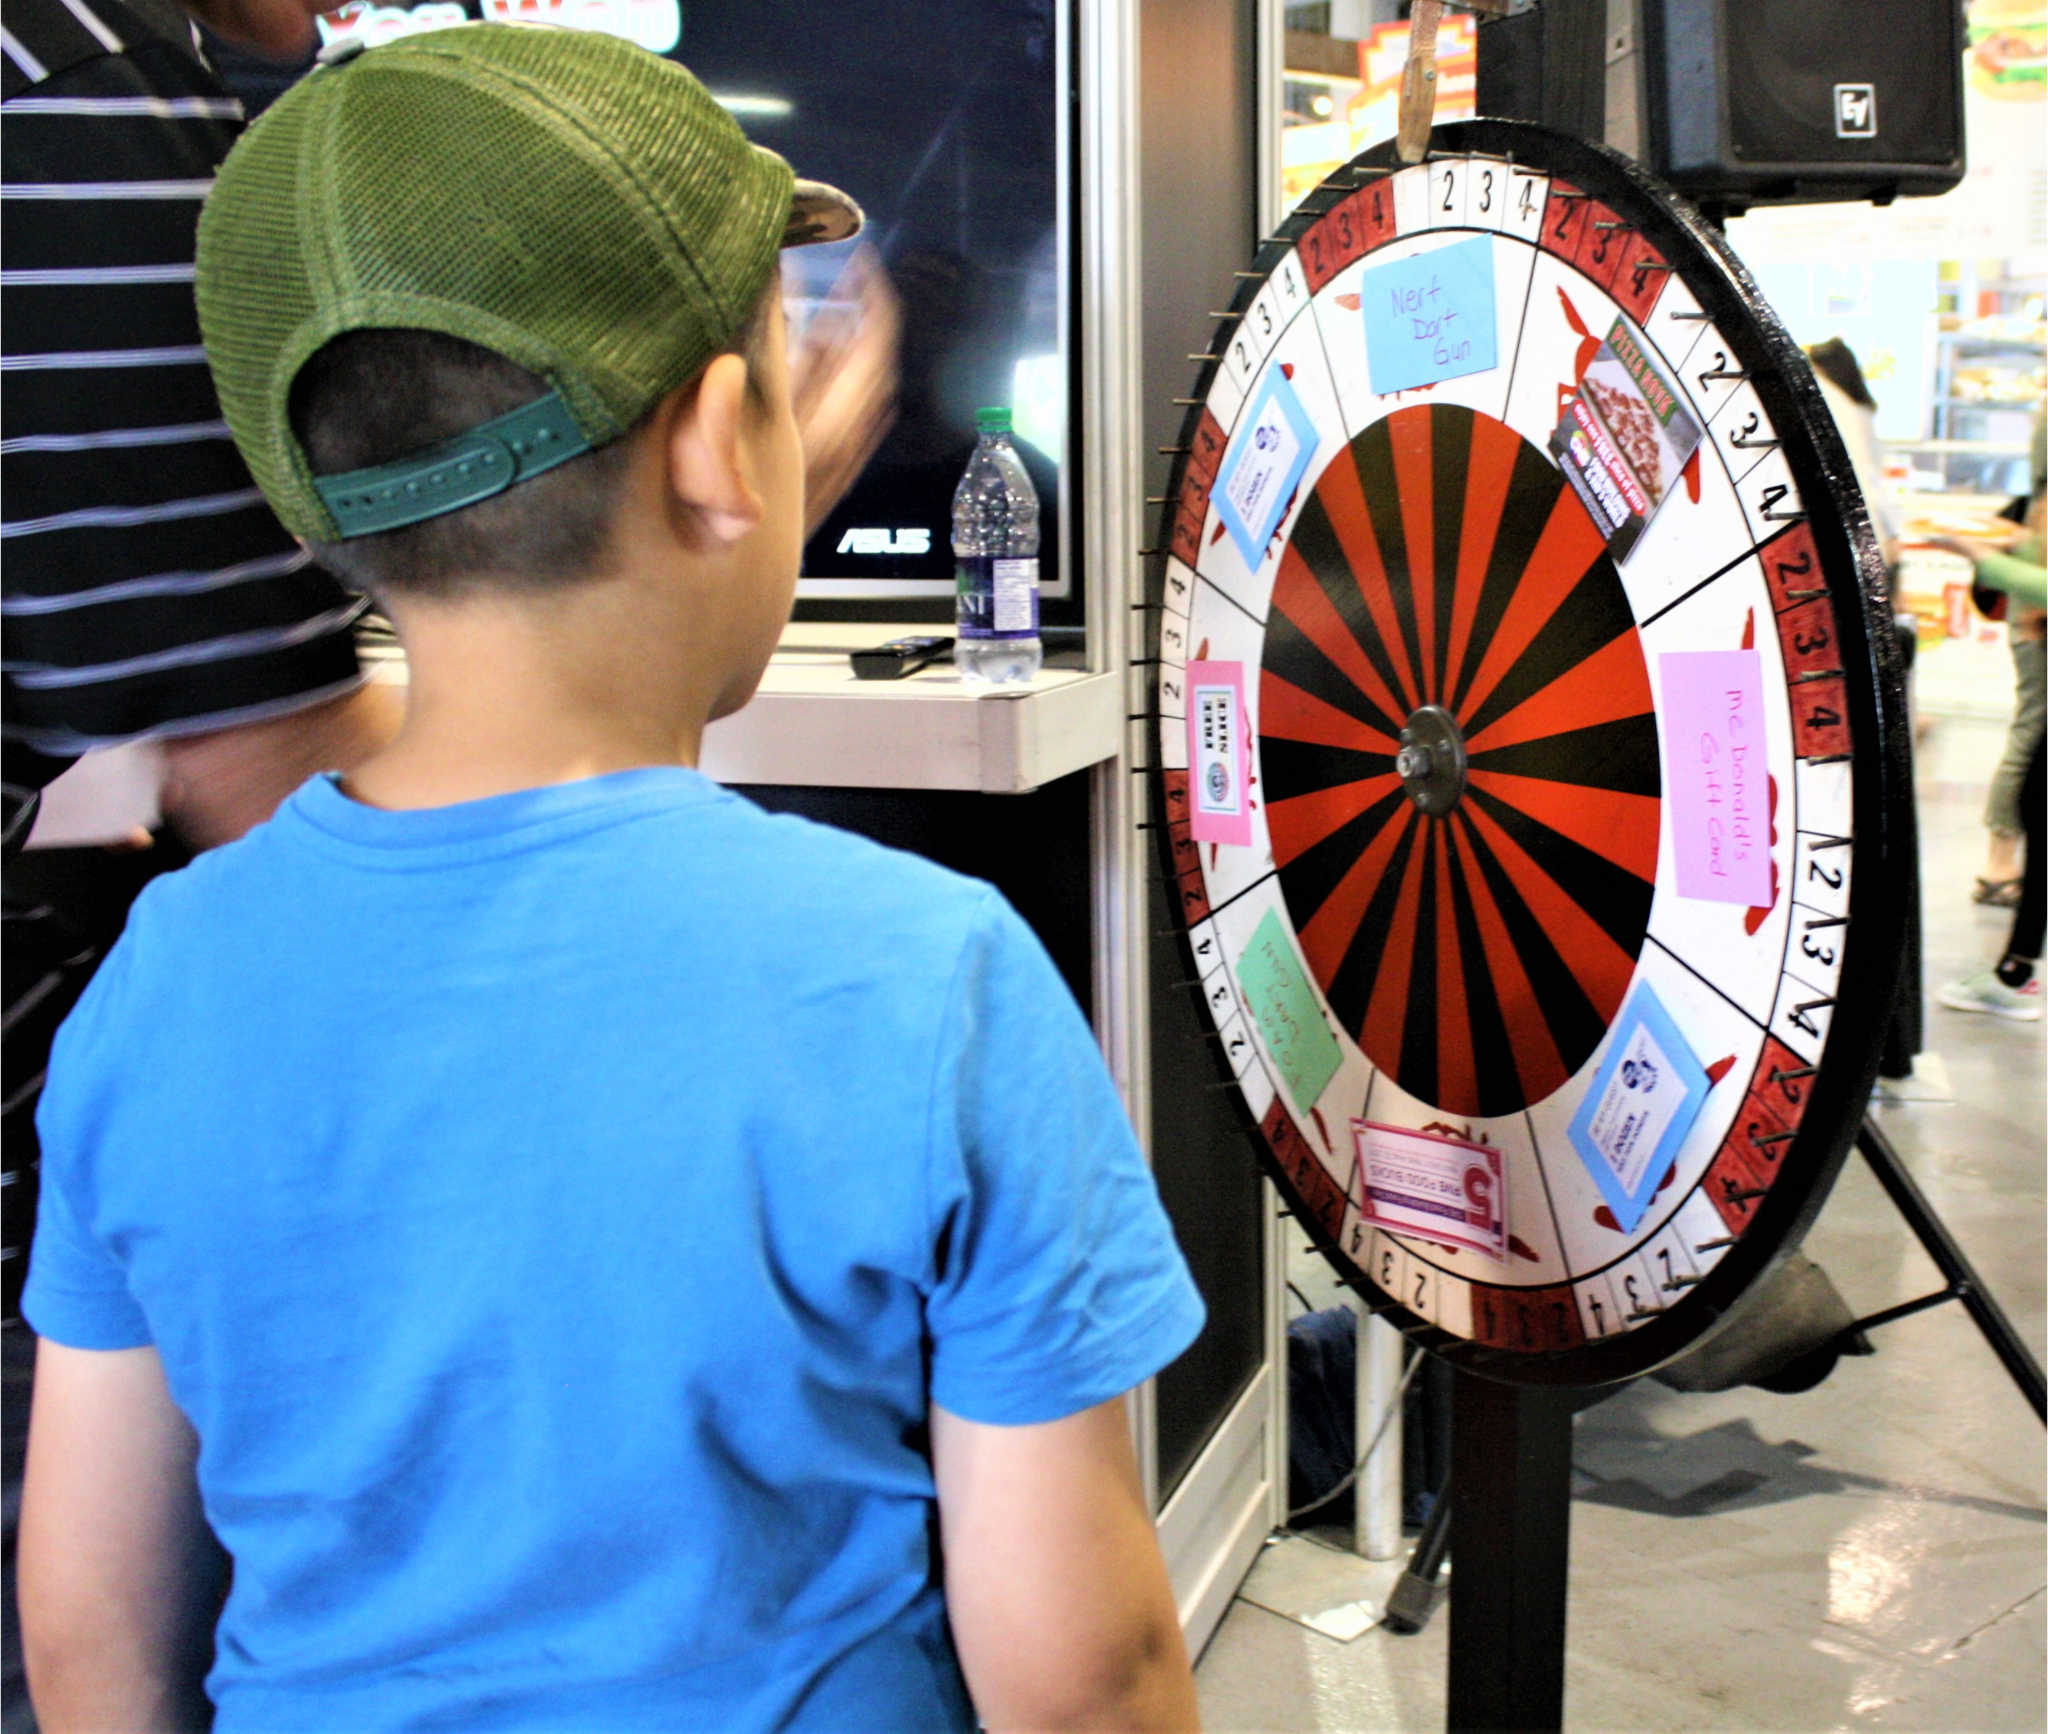 Food Products Day. Image of a young child spinning a wheel to win a prize.